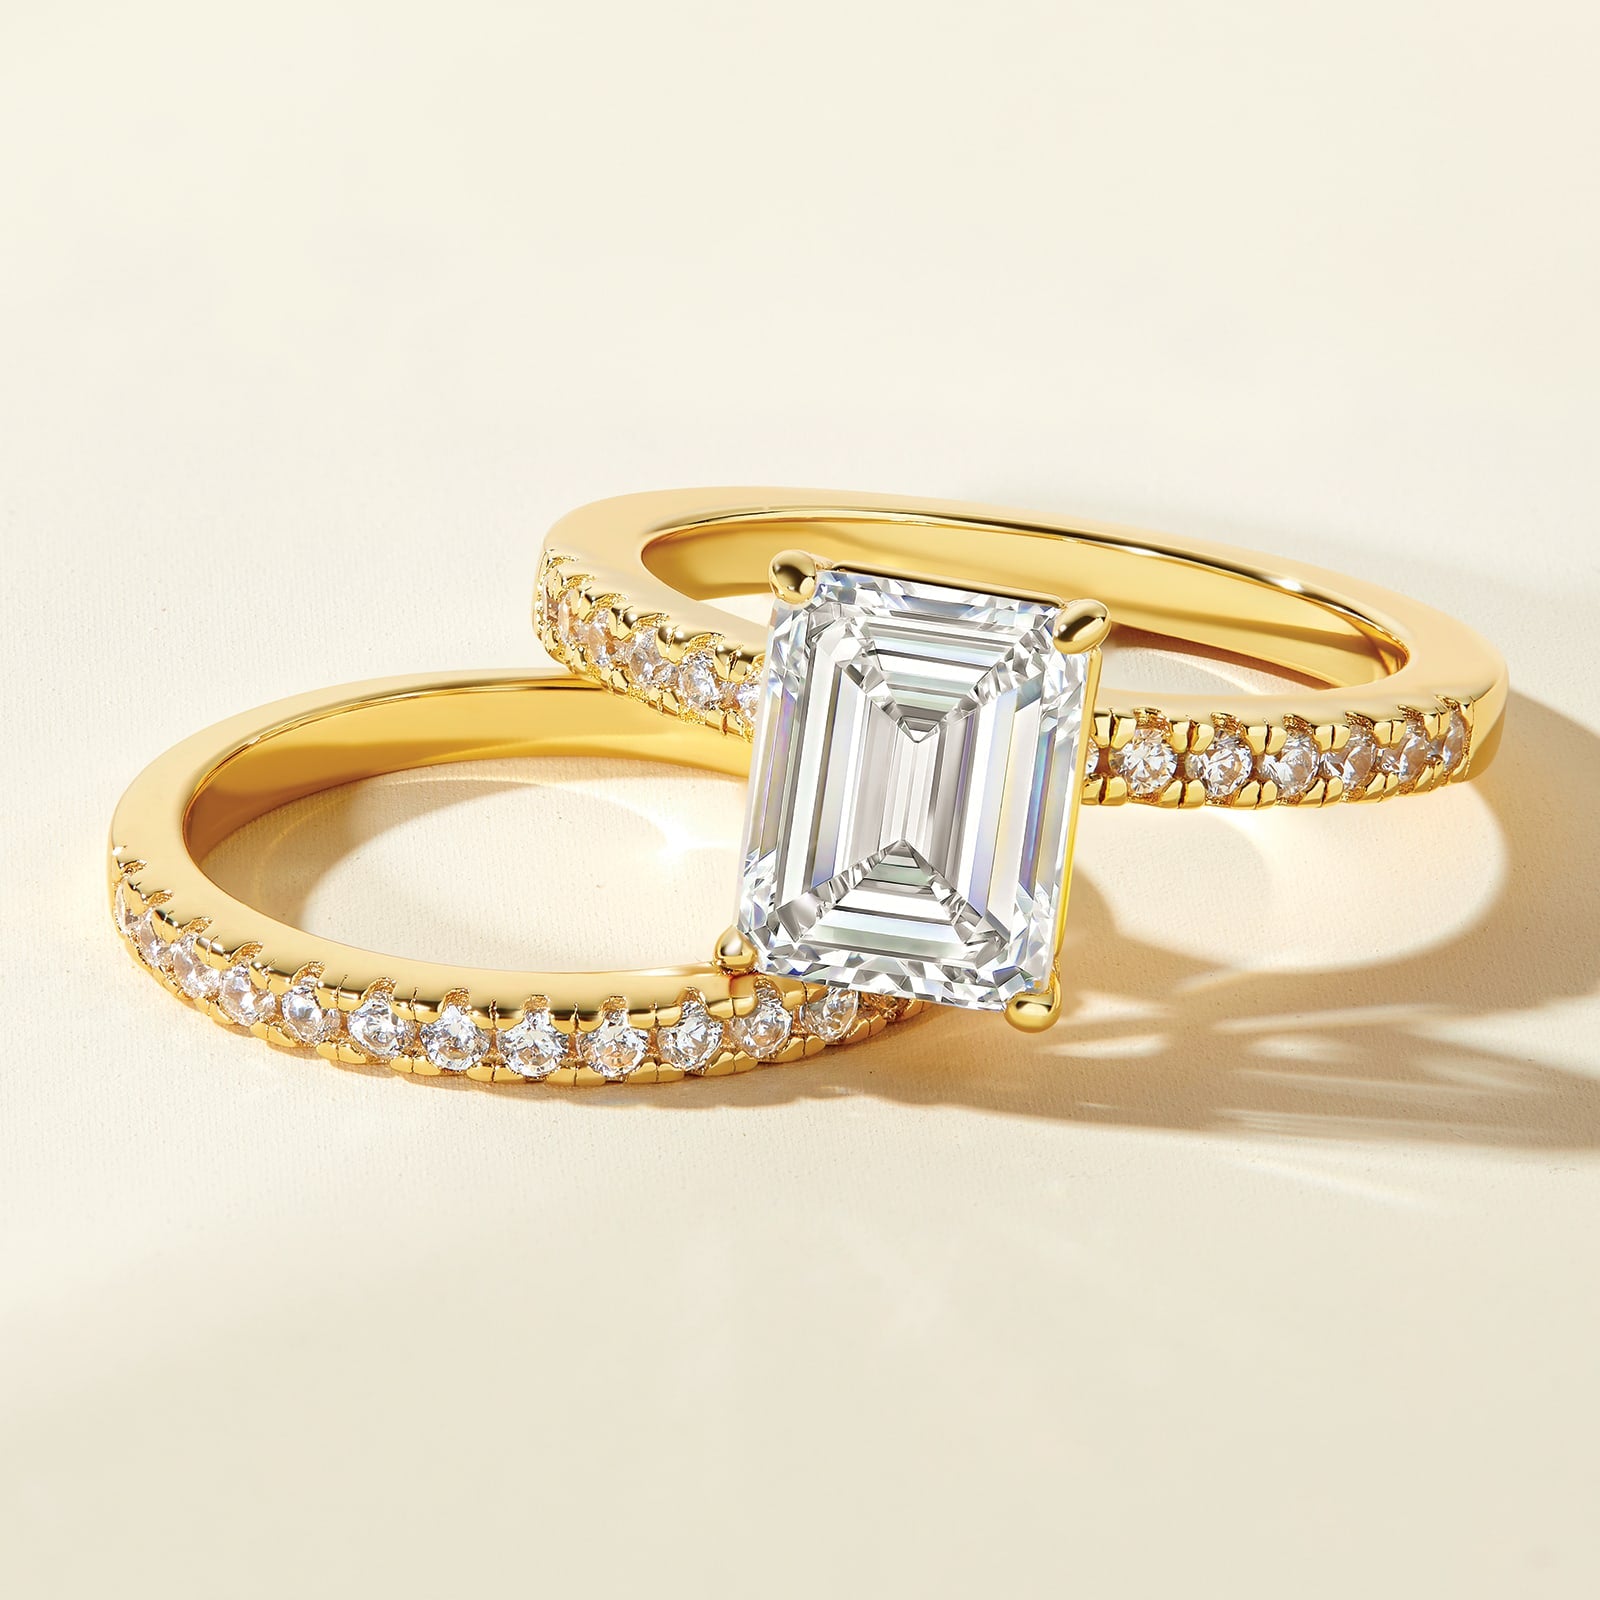 beautiful emerald cut engagement ring with promise gold wedding band